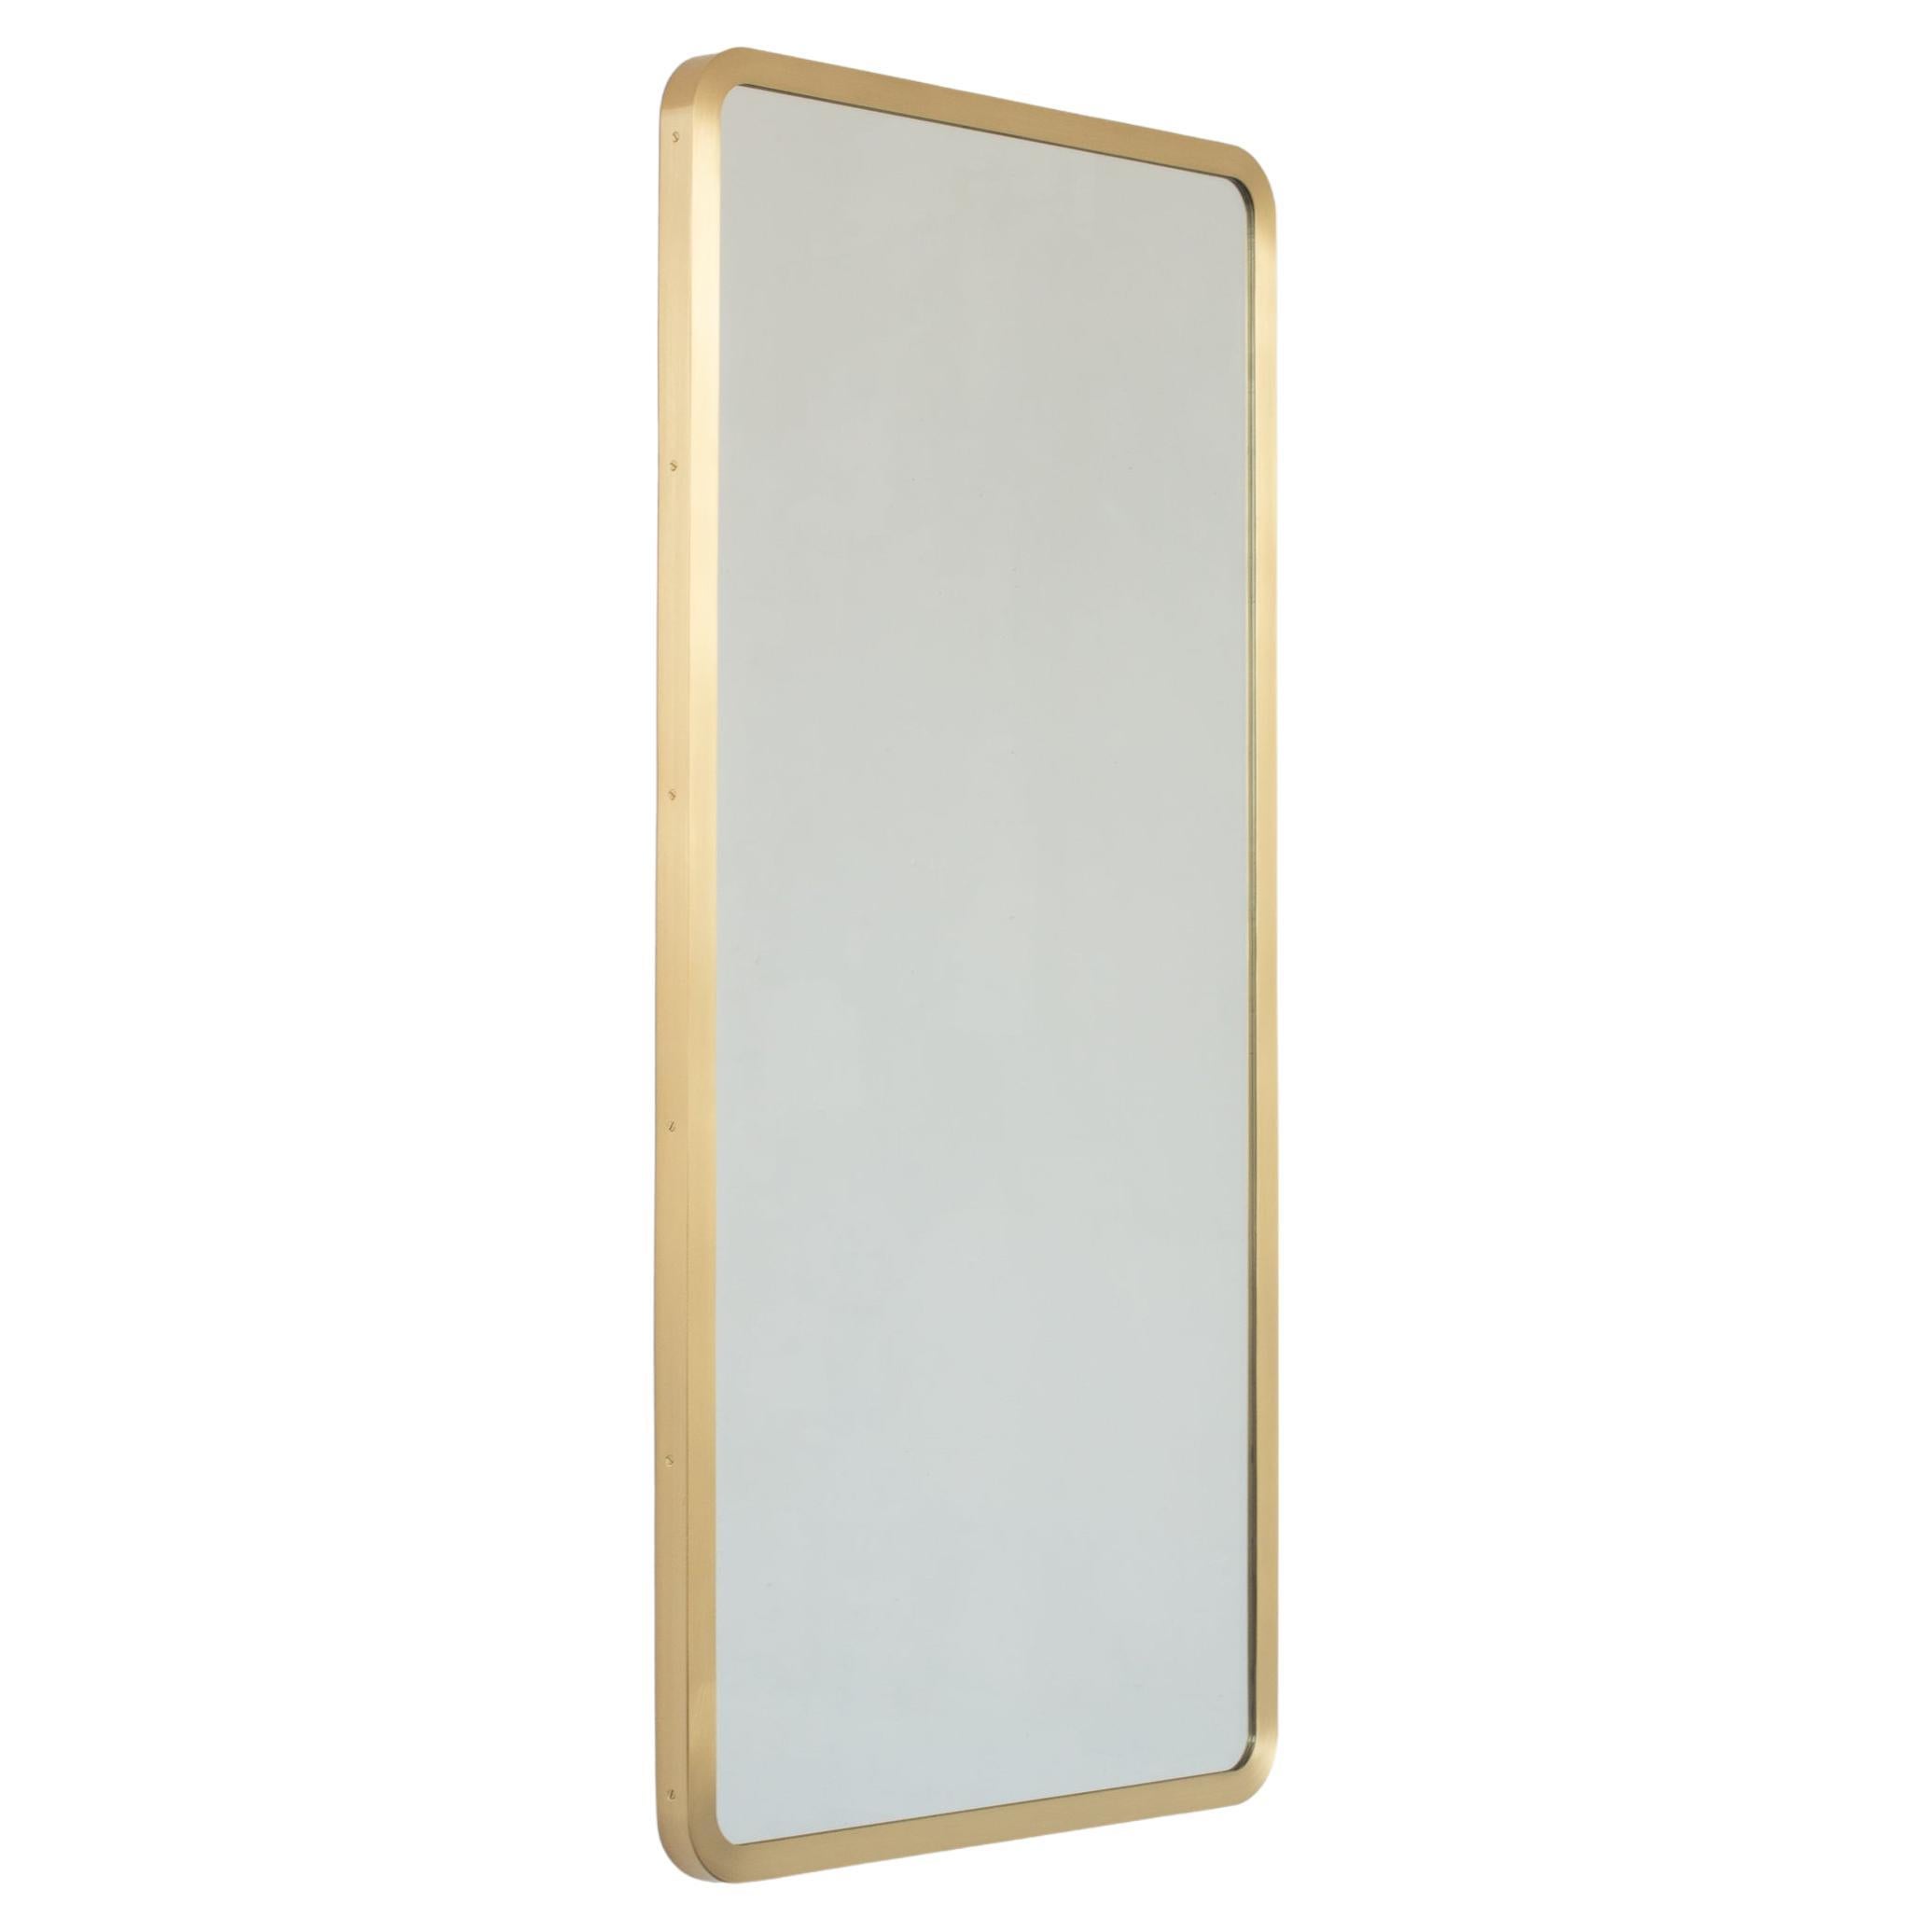 Quadris Rectangular Art Deco Mirror with a Full Front Brass Frame, Large